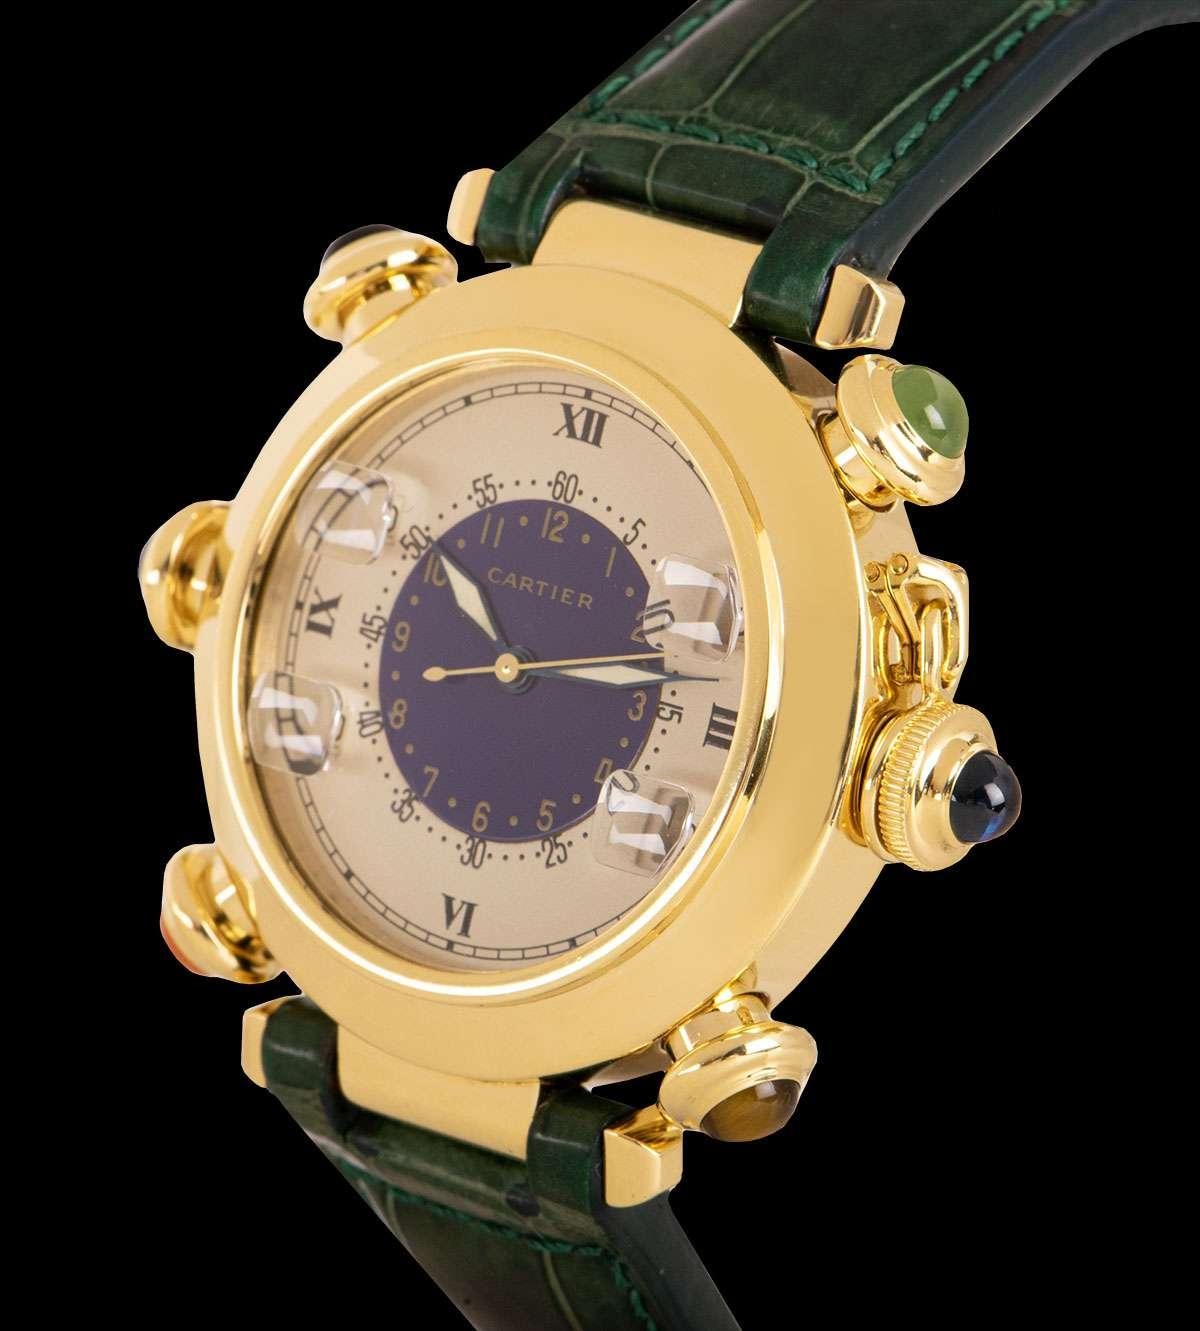 A 38 mm 18k Yellow Gold Pasha de Cartier Golf Gents Wristwatch, off white dial with roman numerals III, VI, IX and XII, blue centre with arabic numbers, four stroke/shot counters each at 2, 4, 8 and 10 0'clock controlled using the five push buttons,